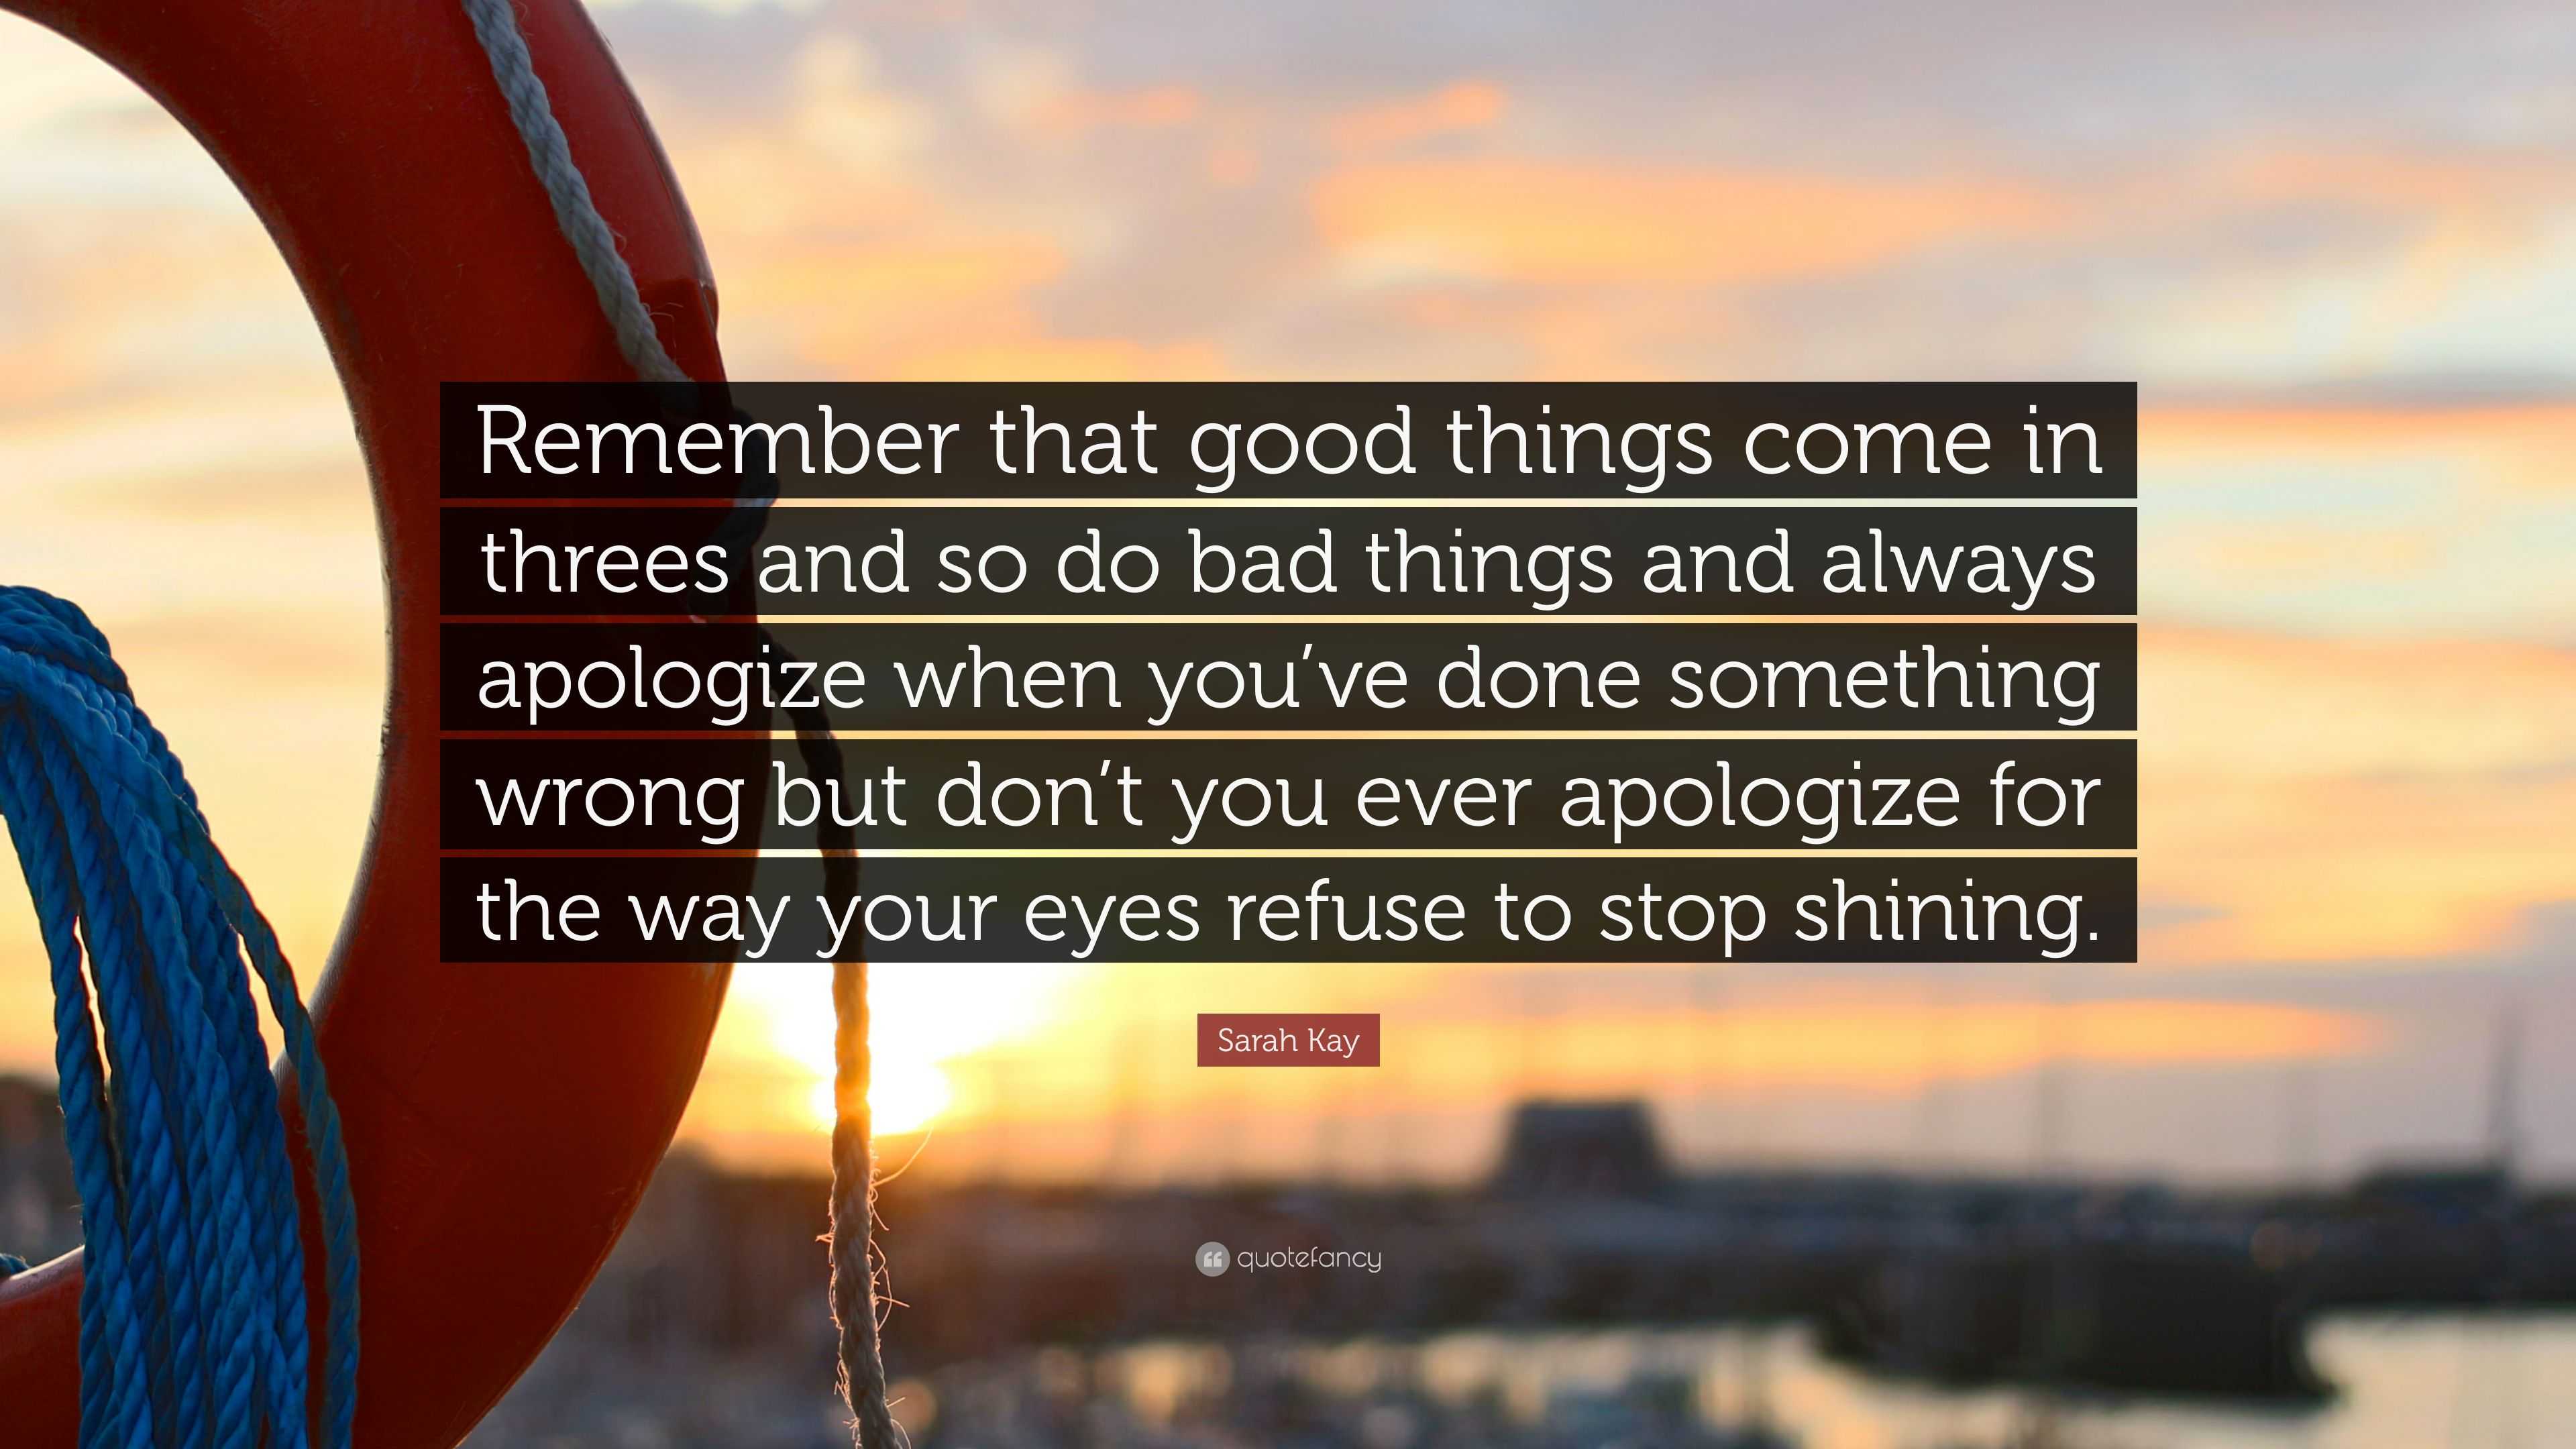 Sarah Kay Quote: "Remember that good things come in threes and so do bad things and always ...